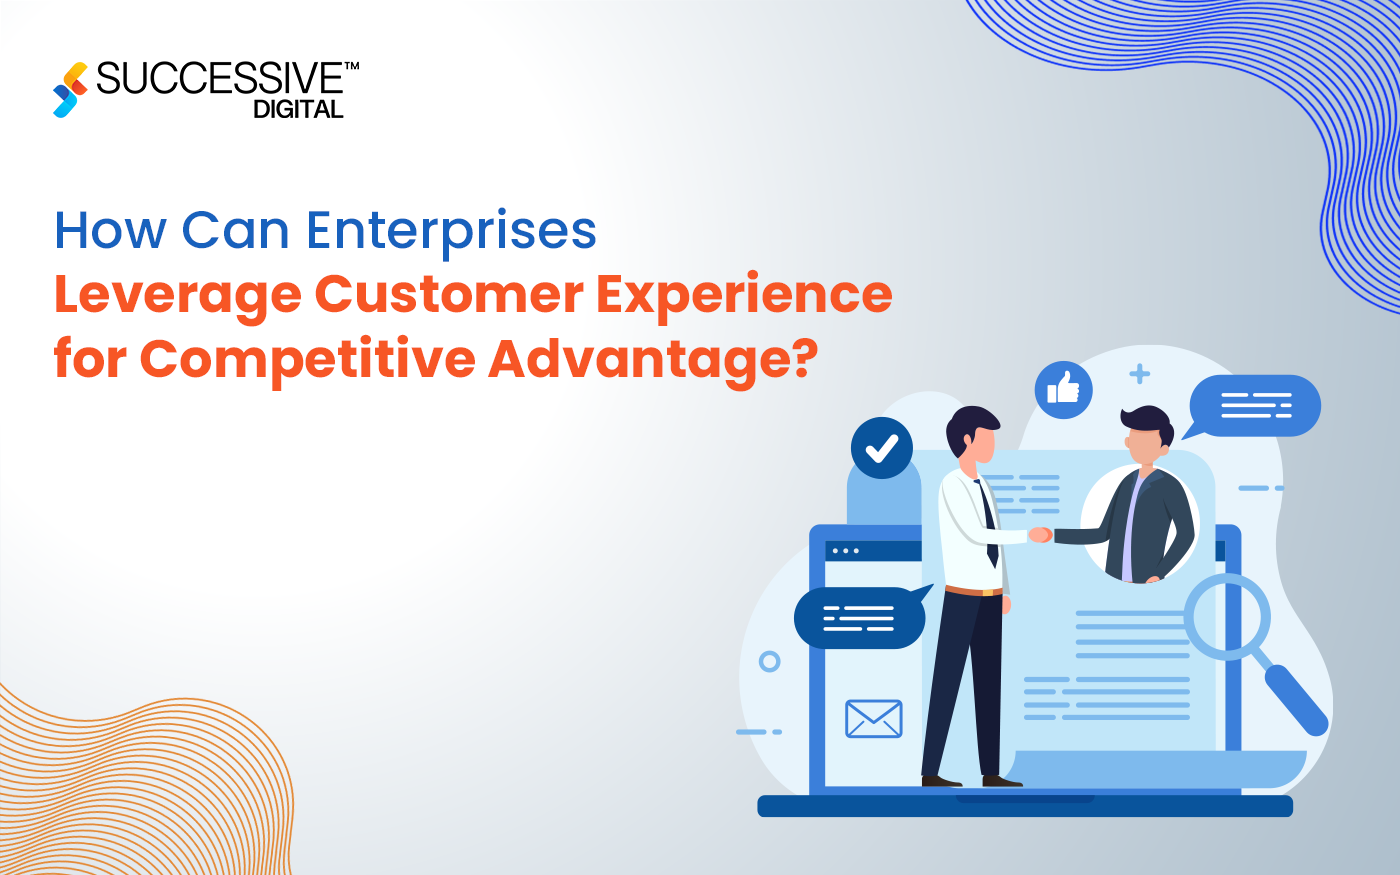 How Can Enterprises Leverage Customer Experience for Competitive Advantage?